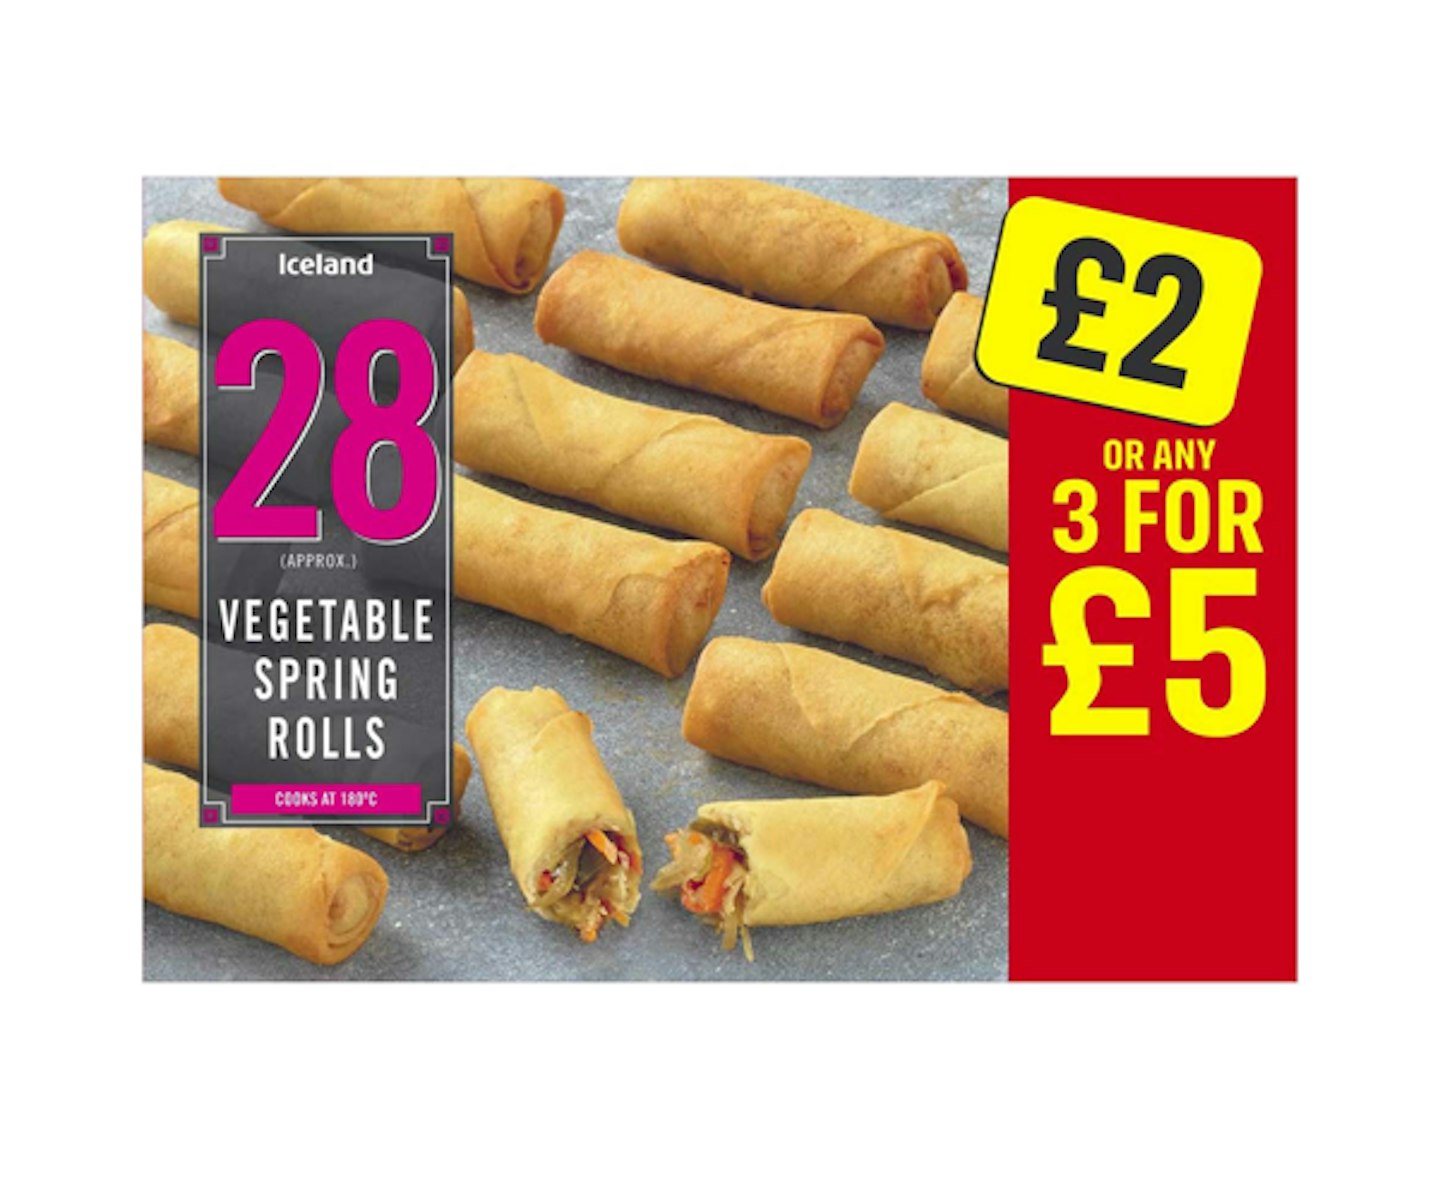 Iceland 28 (approx.) Vegetable Spring Rolls 560g